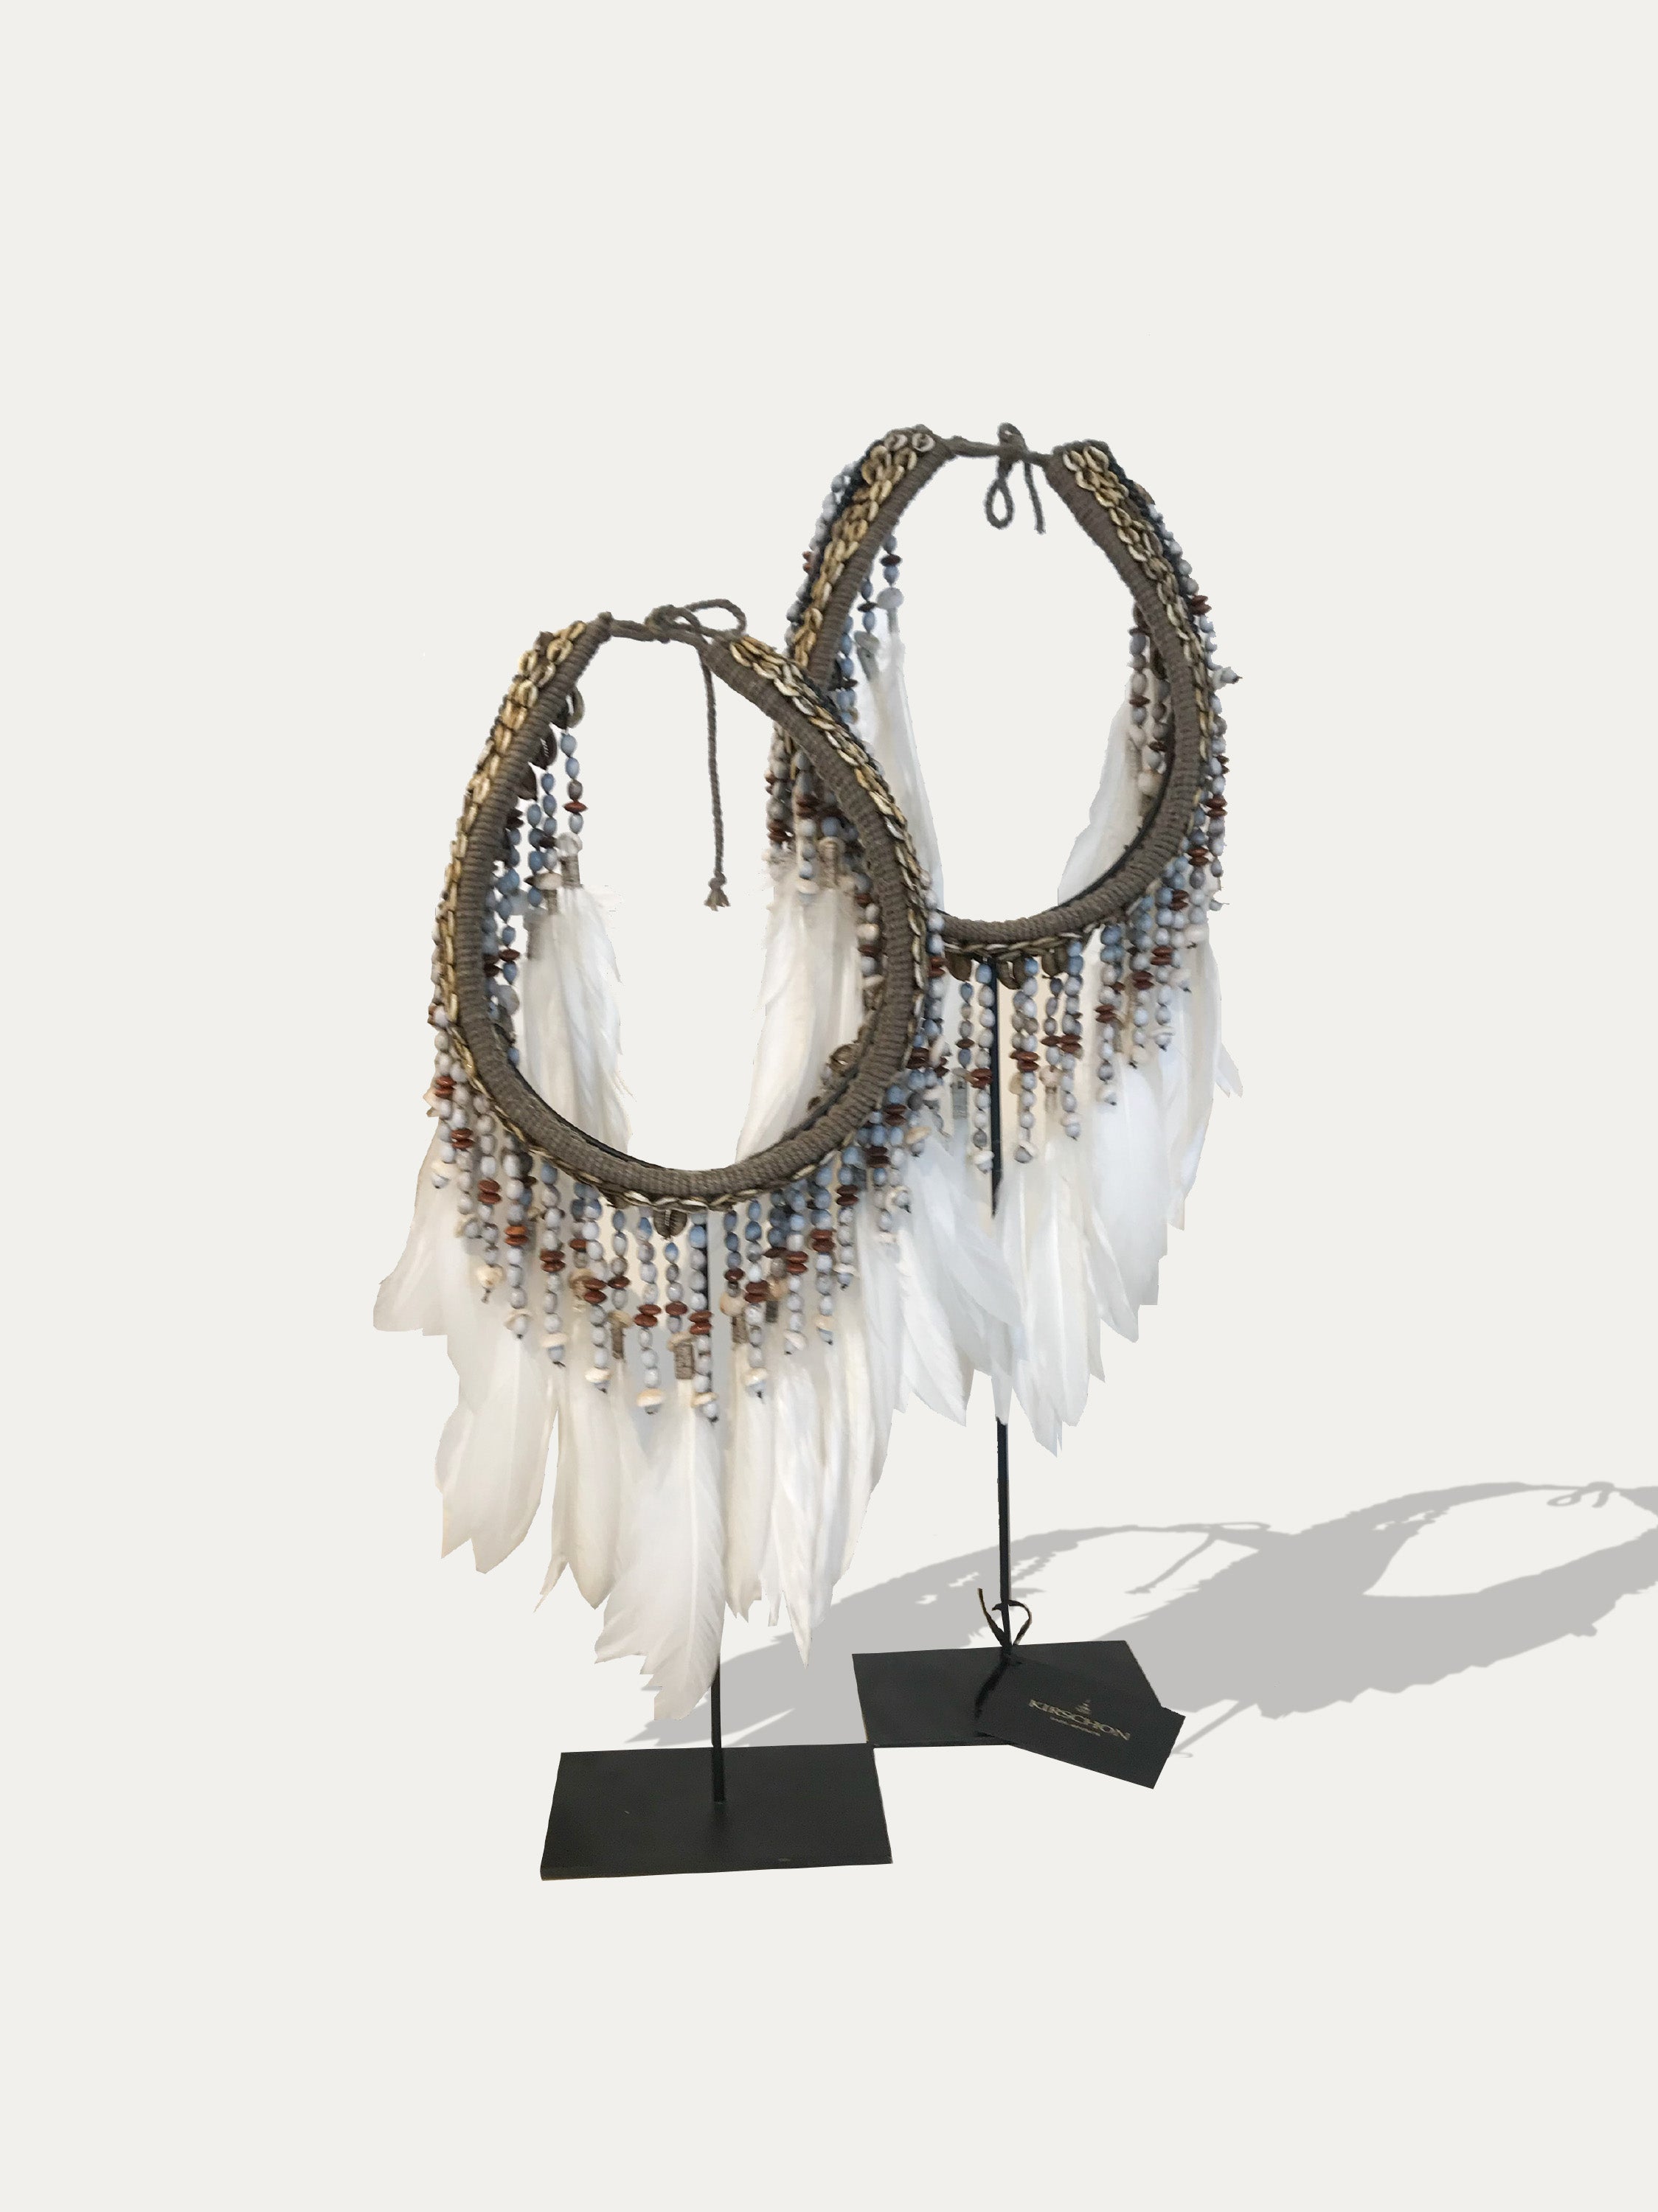 Set of 2 Feather Necklaces from Papua